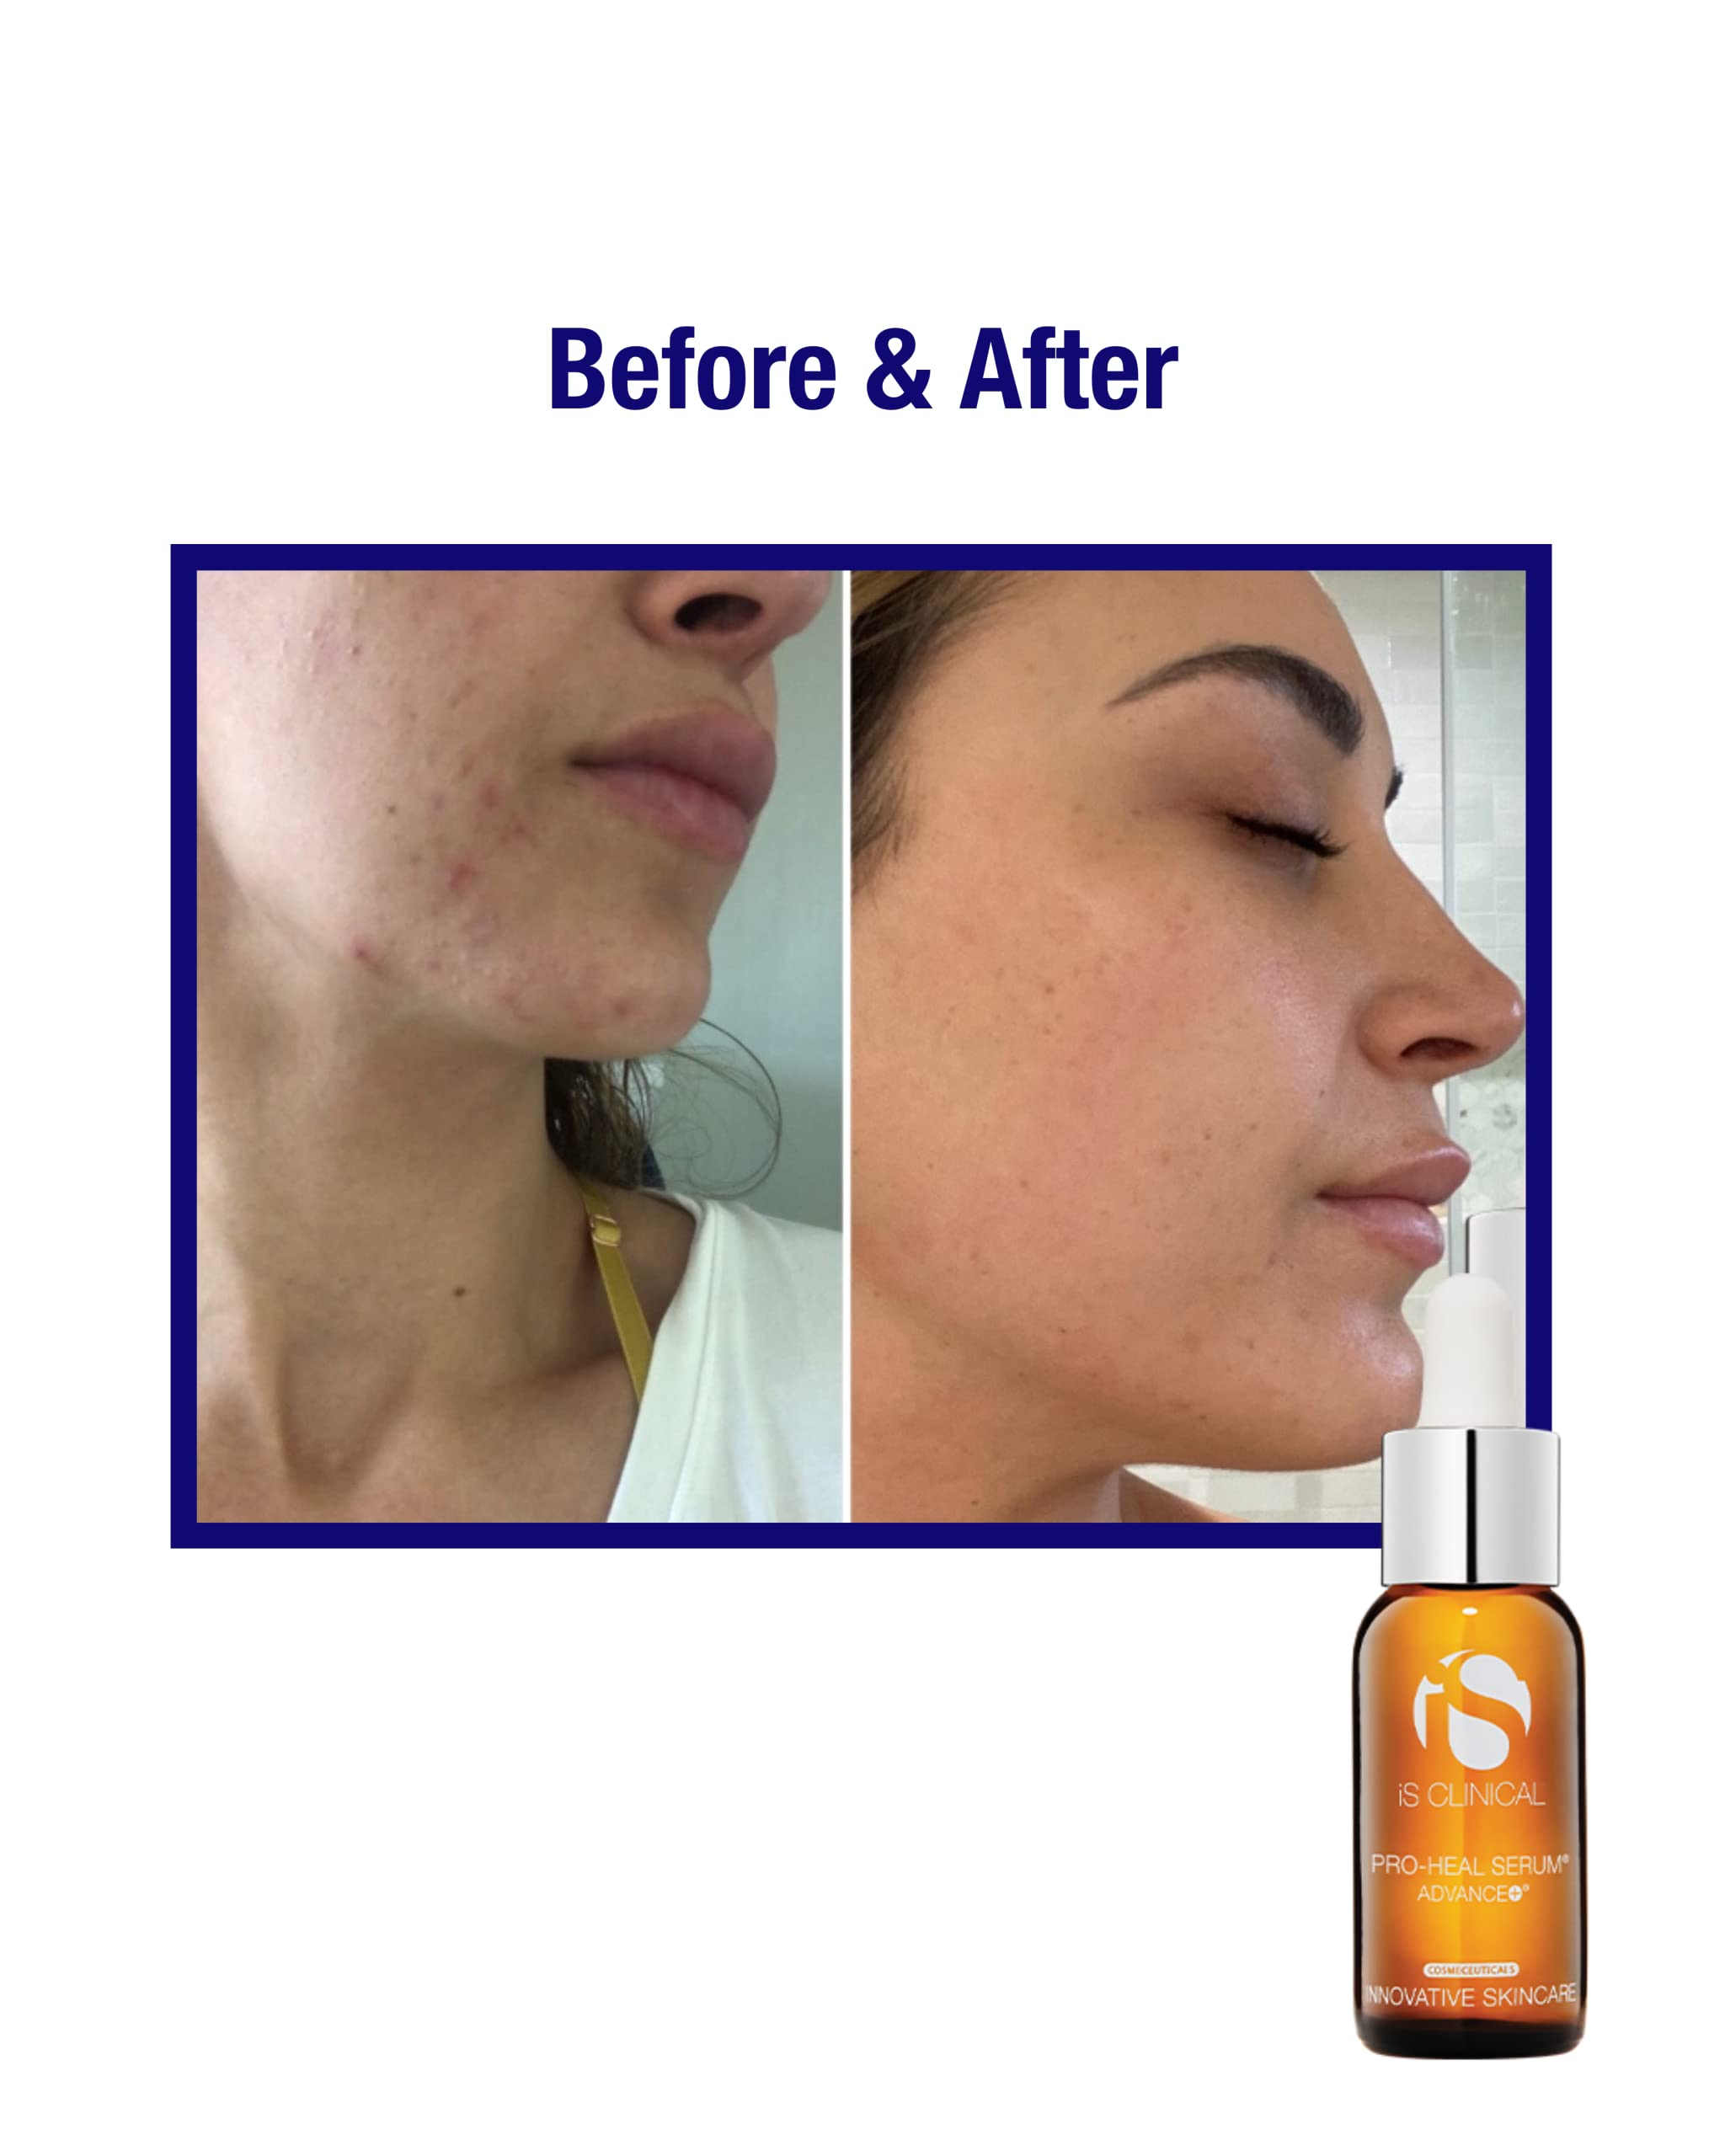 Pro-Heal Serum Advance+ antioxidant-rich serum containing vitamin C, E, and A for redness, rosacea, inflammation